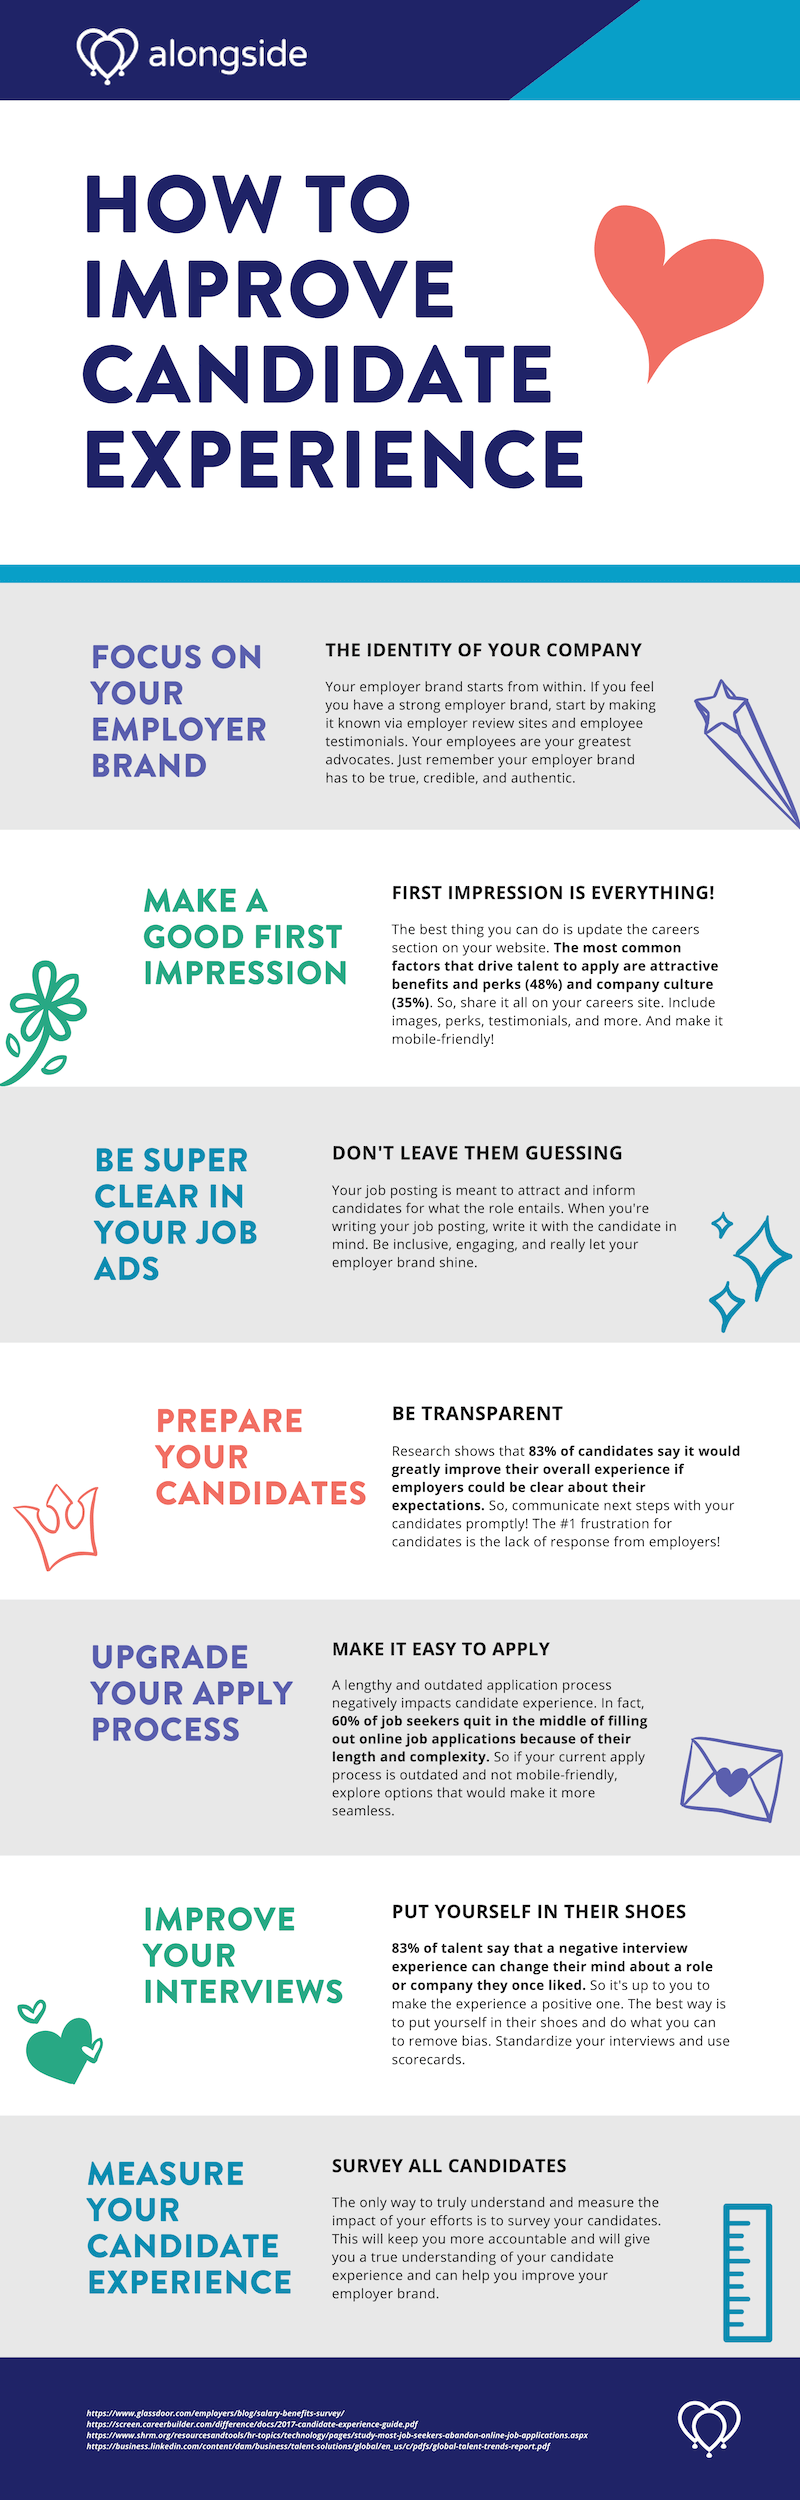 HOW TO IMPROVE CANDIDATE EXPERIENCE INFOGRAPHIC